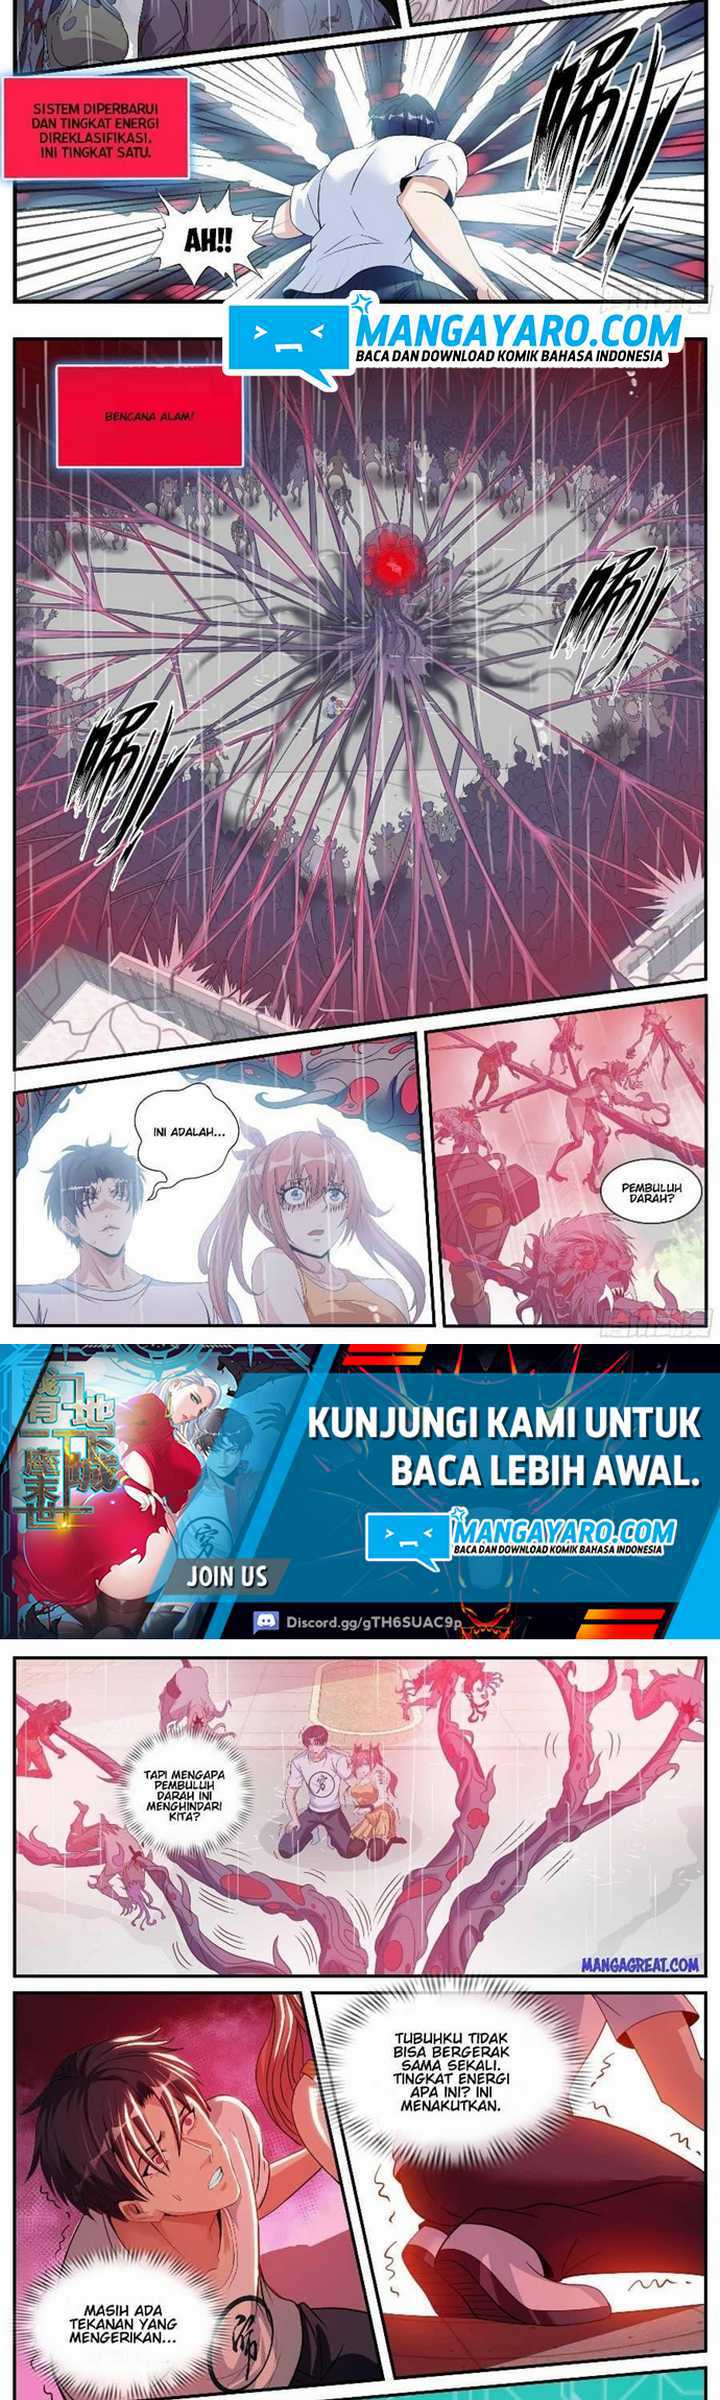 I Have An Apocalyptic Dungeon Chapter 31 bahasa indonesia